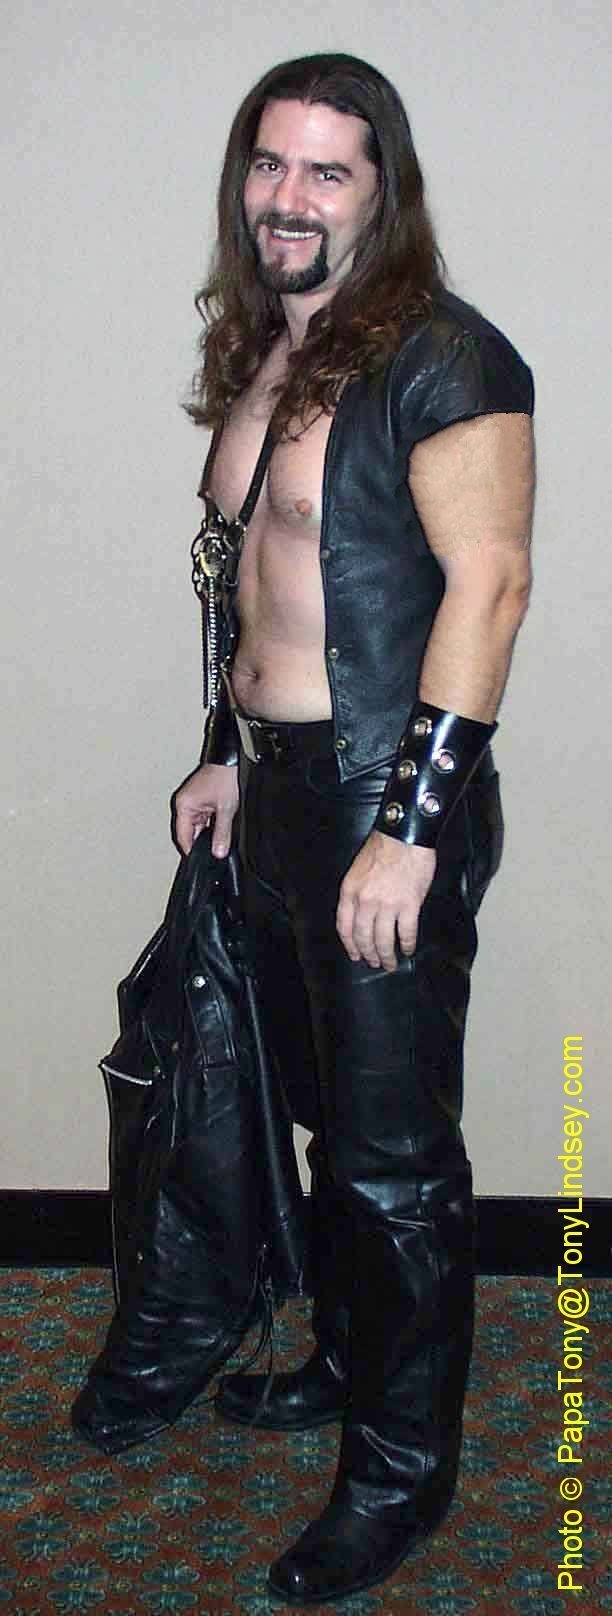 Coming back to THE LOBBY from a night out at IML